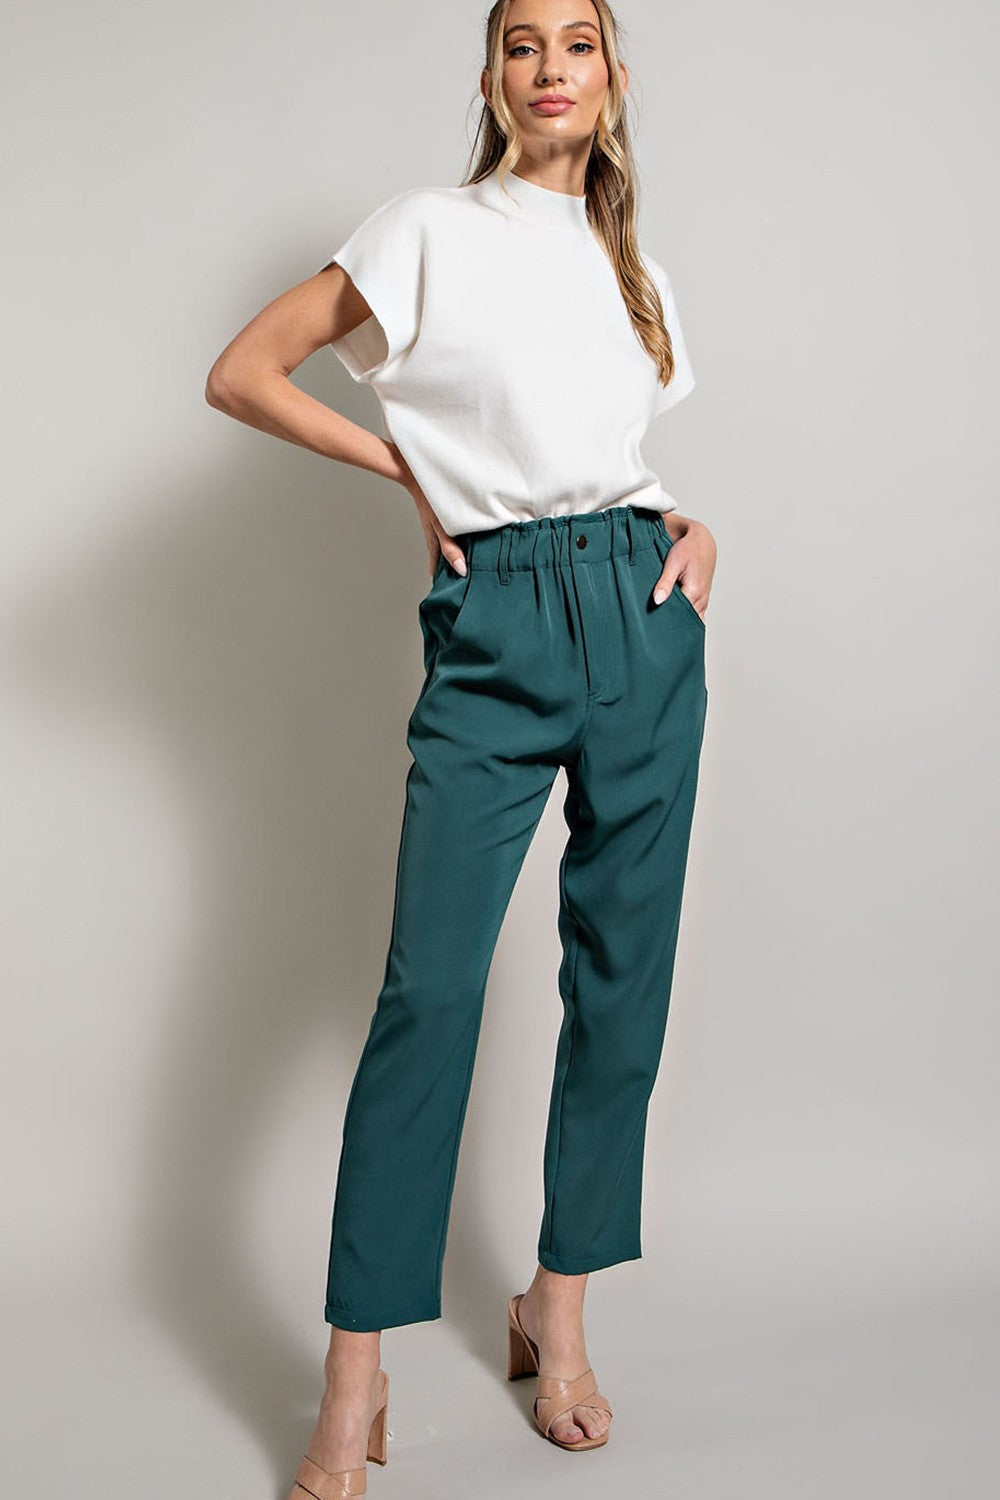 Teal Banded Straight Dressy Pants